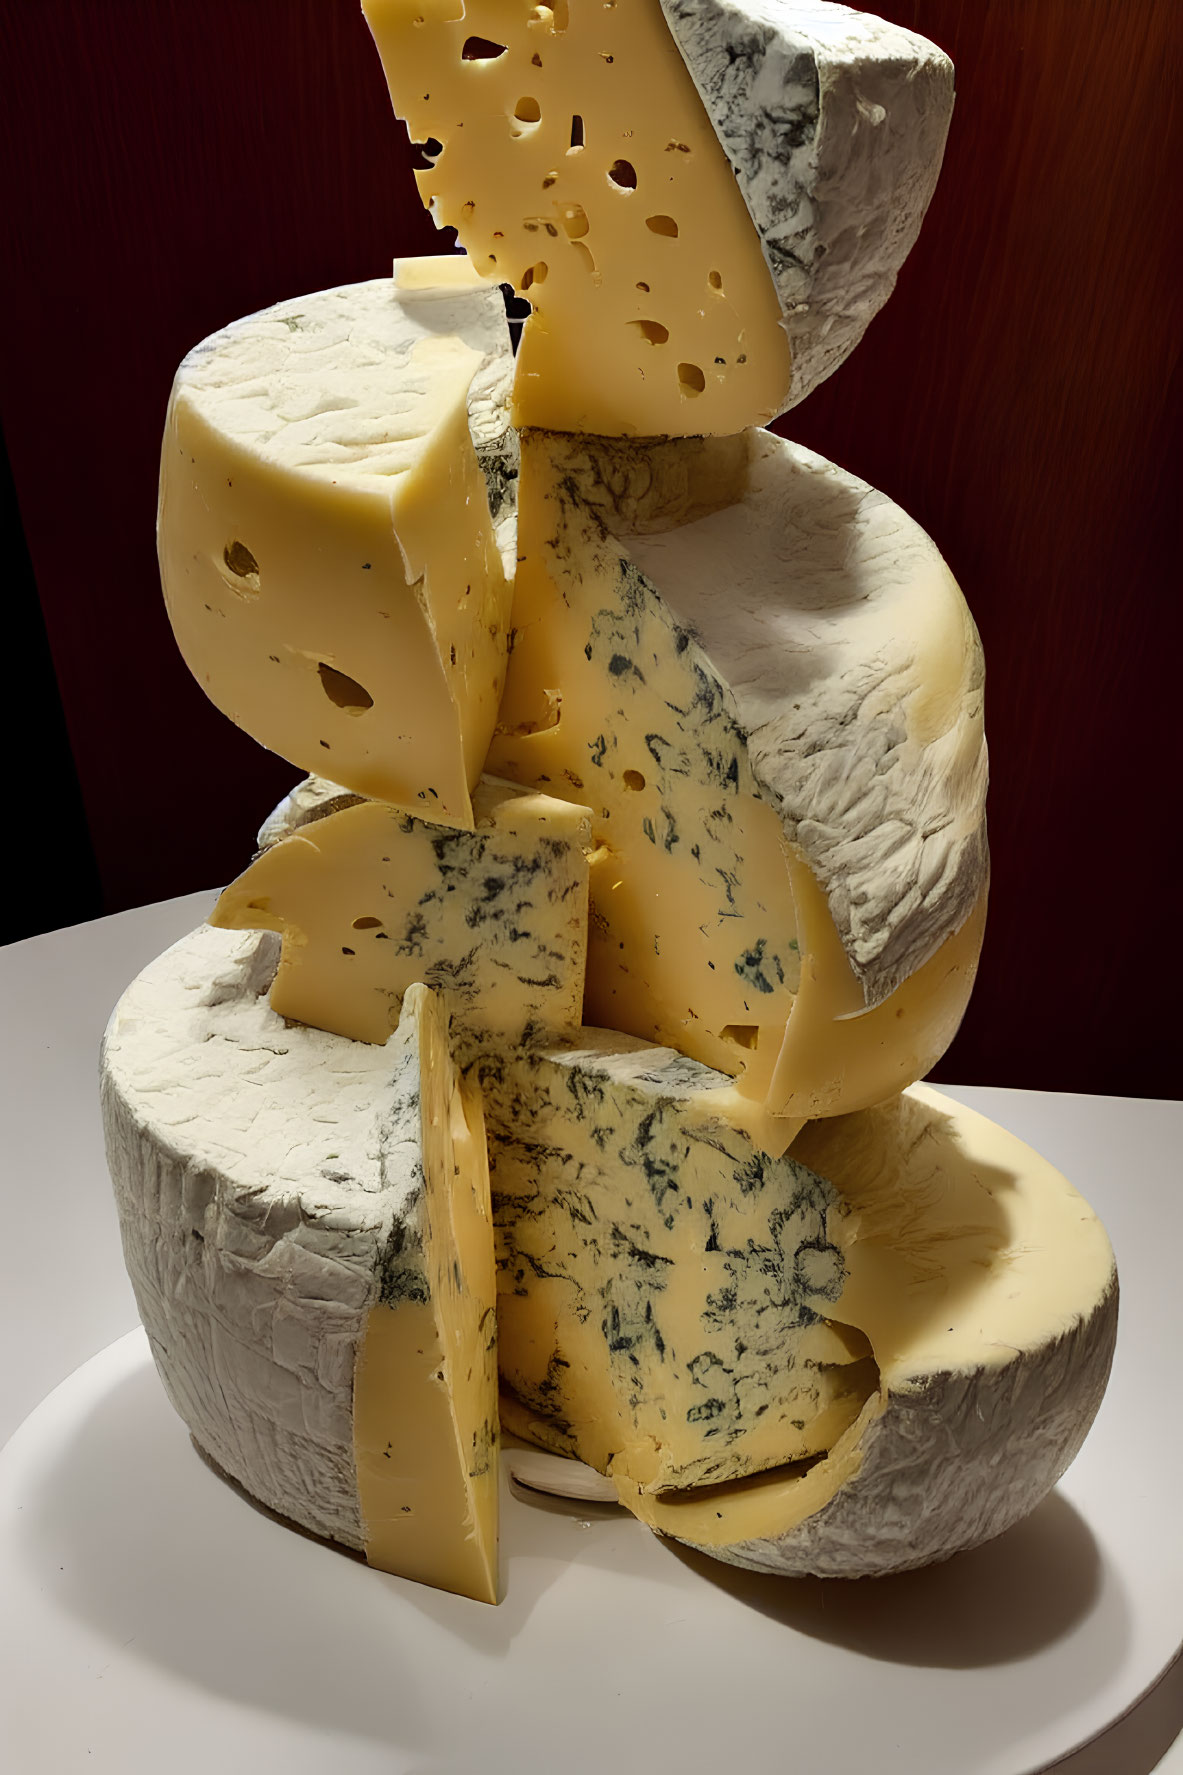 Assorted Cheese Tower Featuring Swiss, Blue Cheese, and Brie